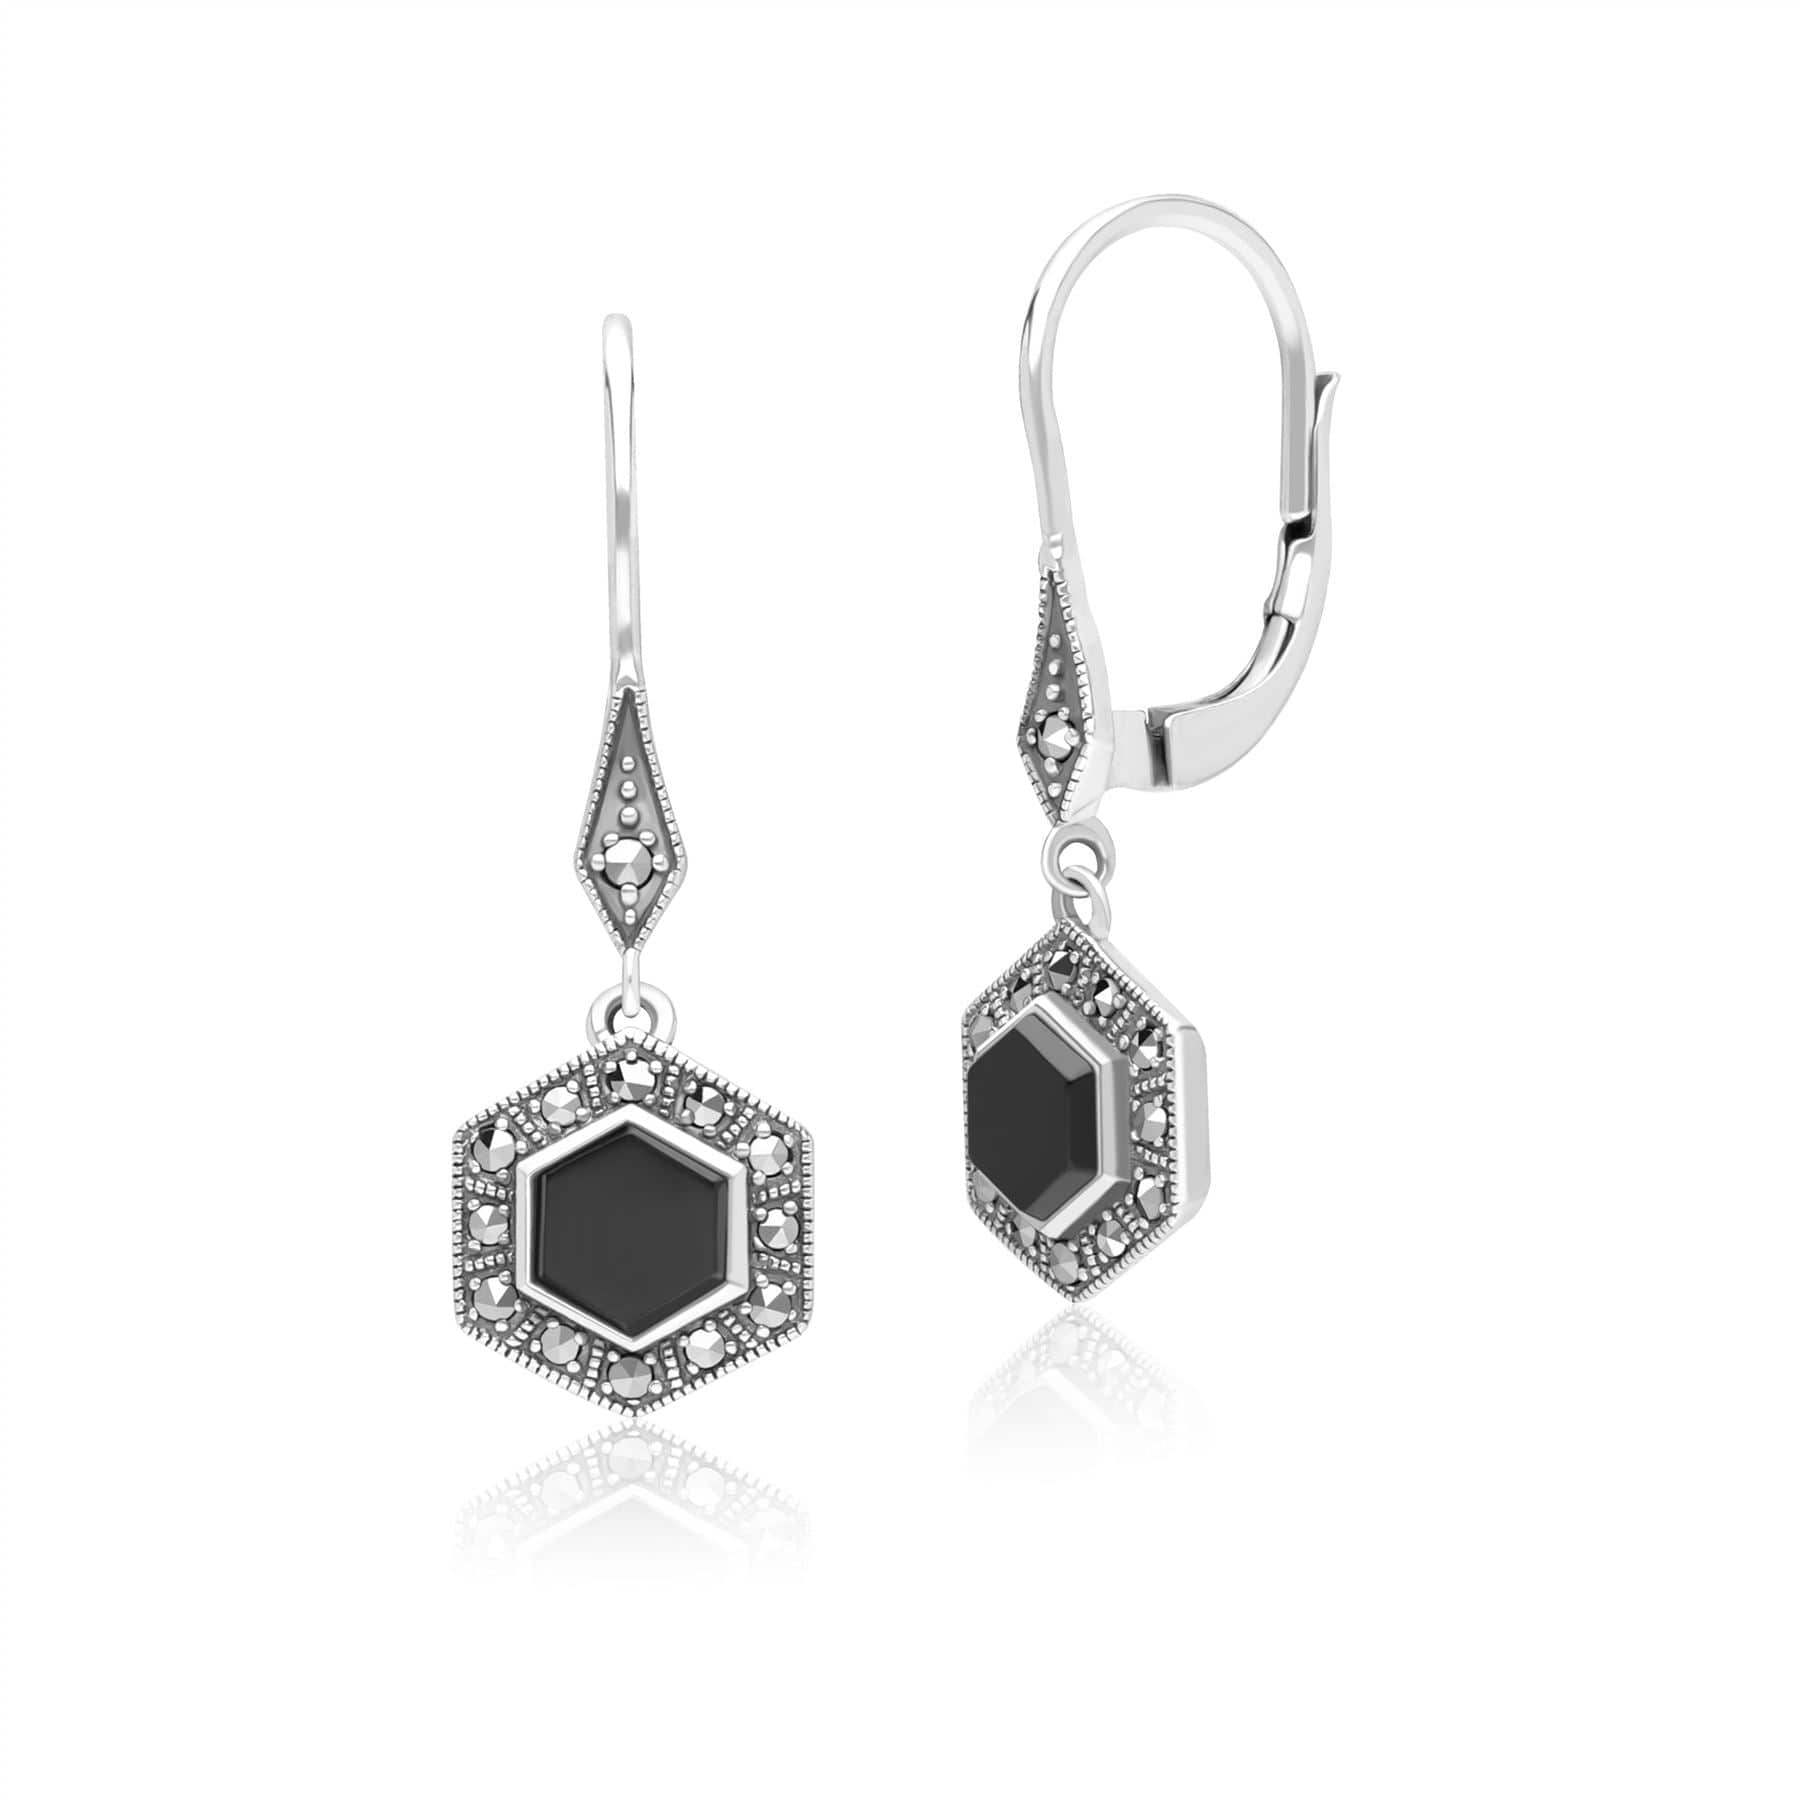 Art Deco Style Hexagon Onyx and Marcasite Drop Earrings in Sterling Silver 214E936002925 